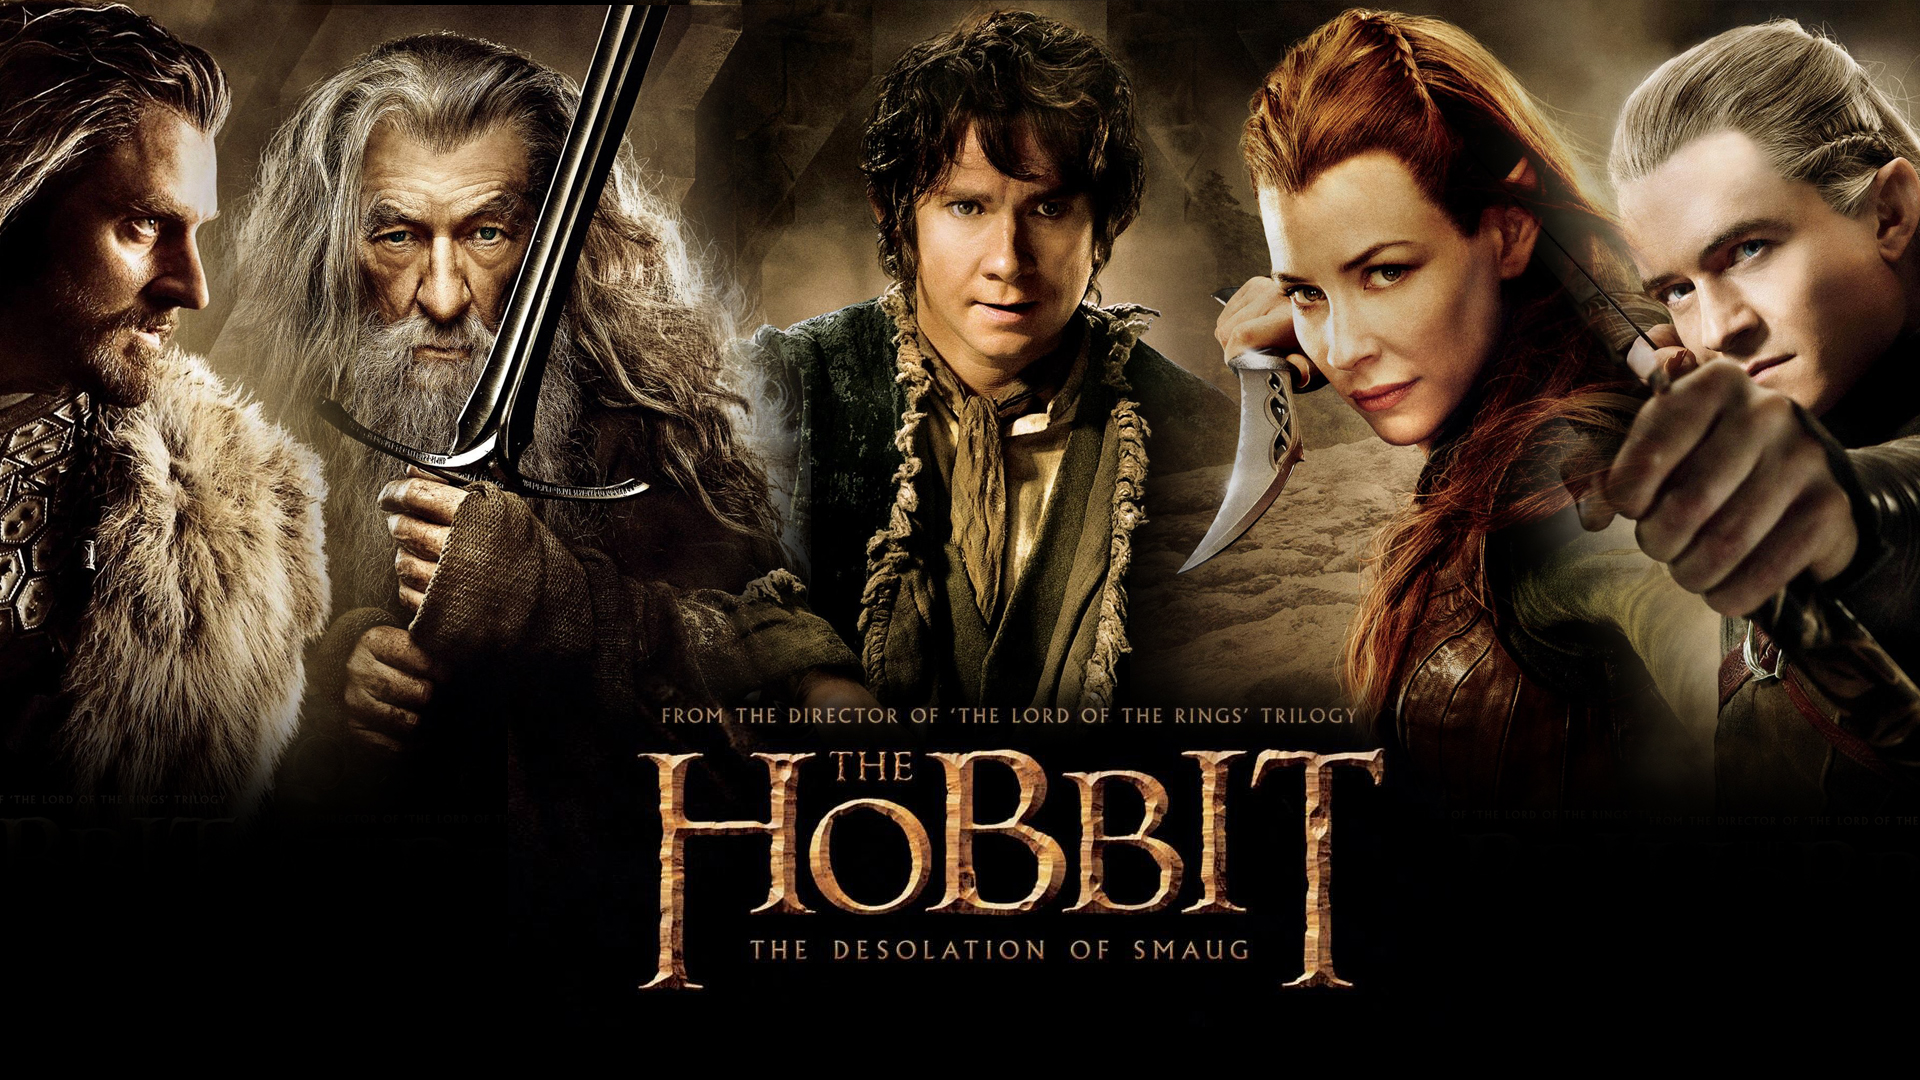 Download The Hobbit The Desolation Of Smaug 2013 Full Hd Quality